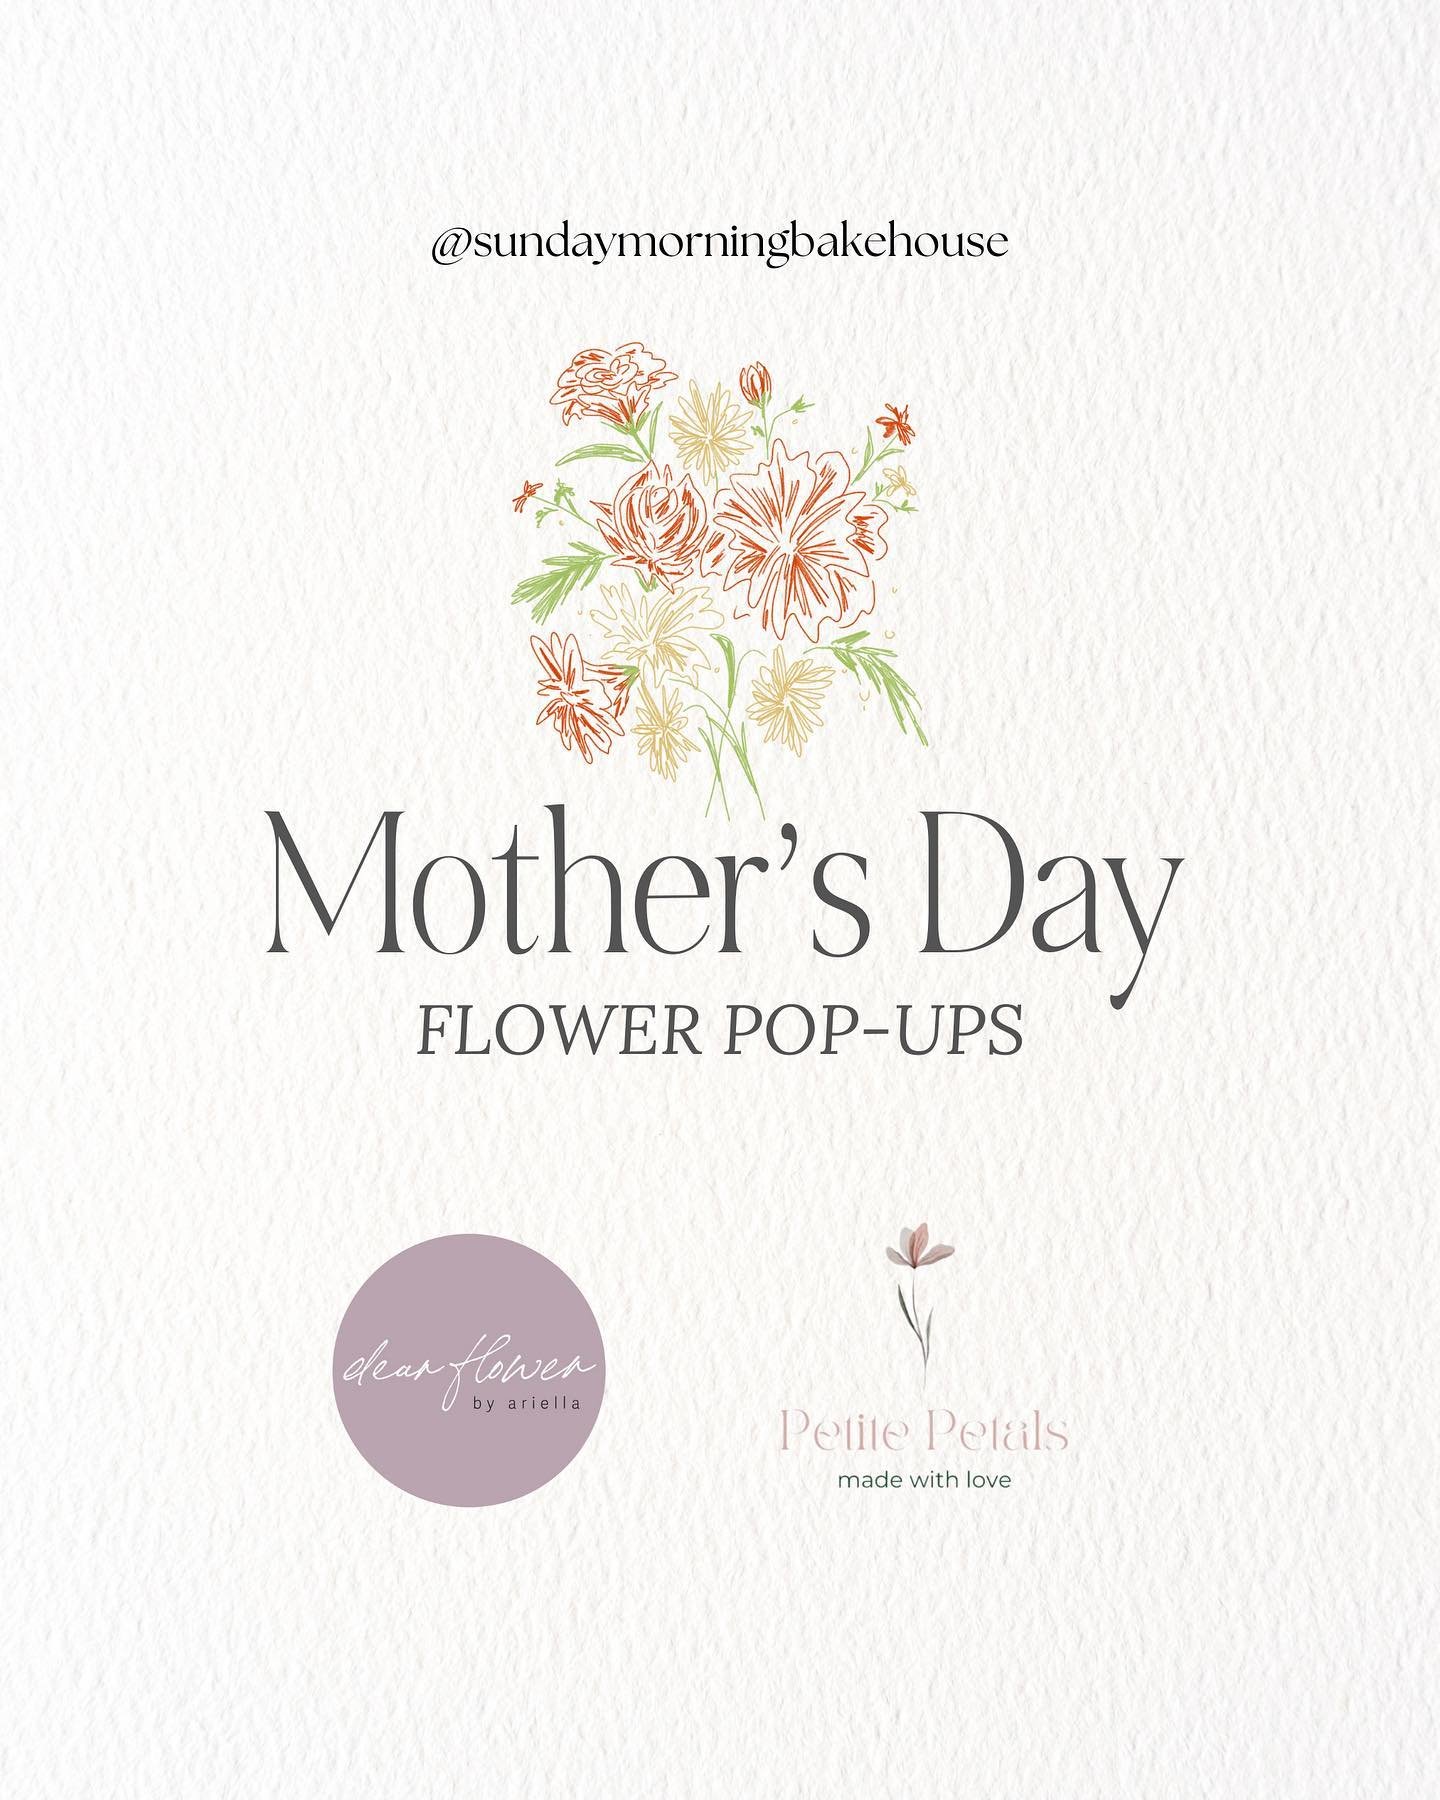 We are excited for this year&rsquo;s Mothers Day and even more excited to announce that we are doing two flower pop-ups that weekend! 💐

🌸 May 11 &mdash; @_dear_flower_ 
8AM until sold out
- they will also be doing floral box preorders; find the li